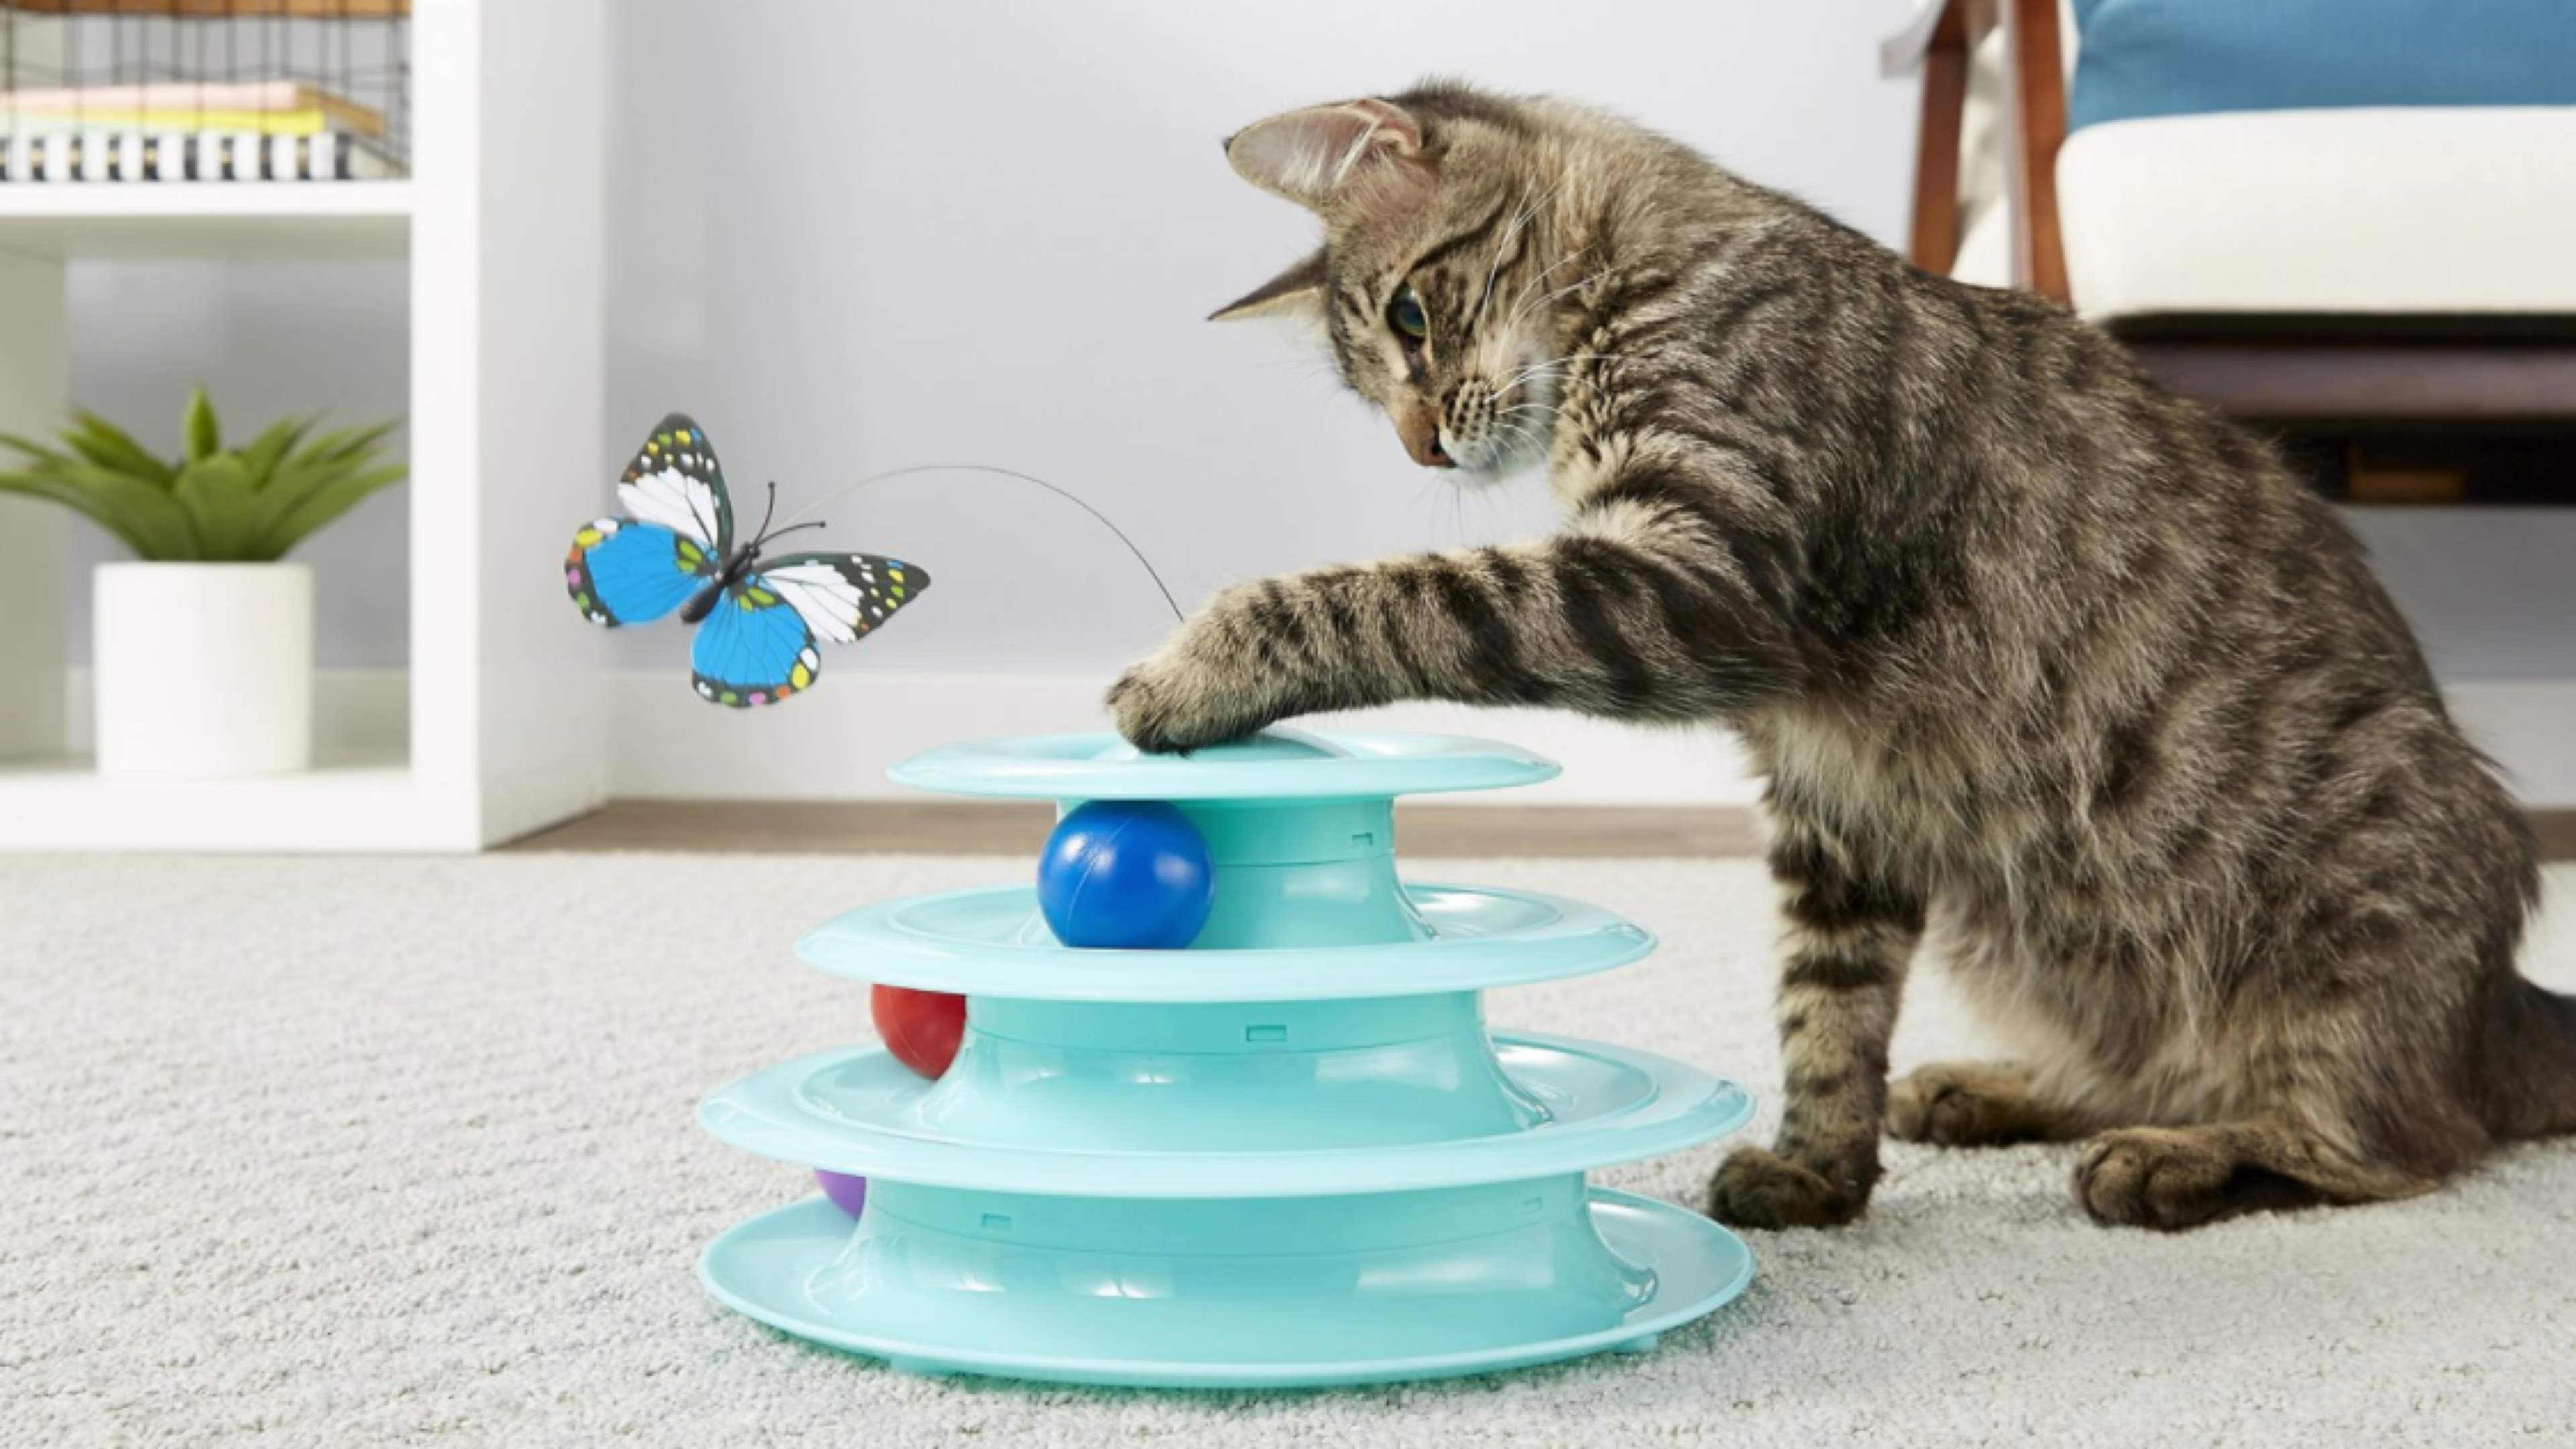 cat toy with rotating balls and butterflies they can swat at